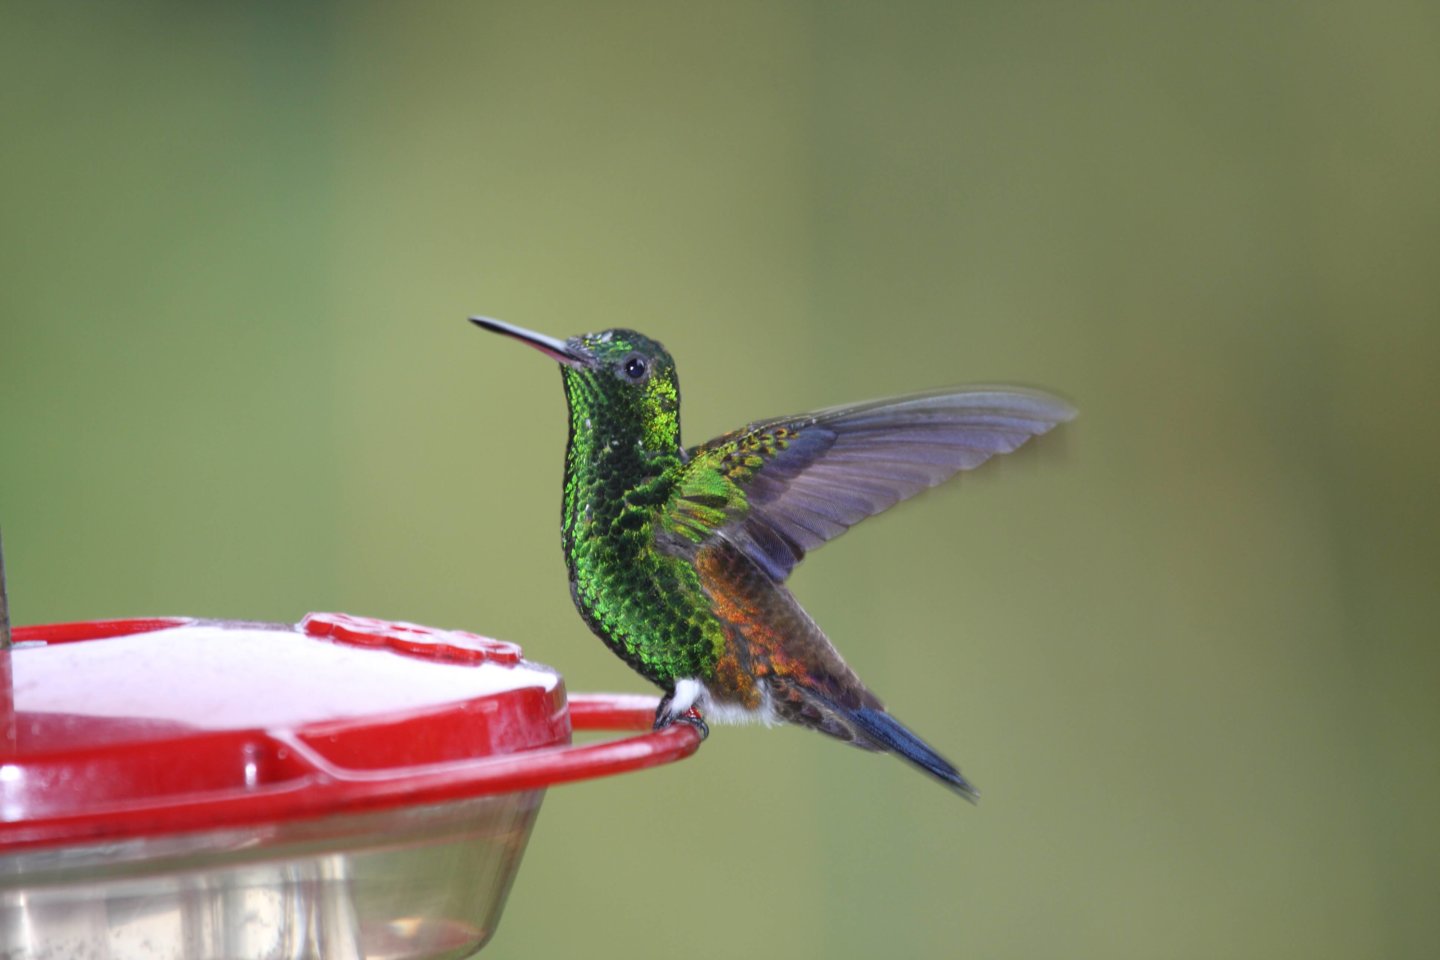 This photo shows a copper=rumped hummingbird sitting on the edge of a feeder